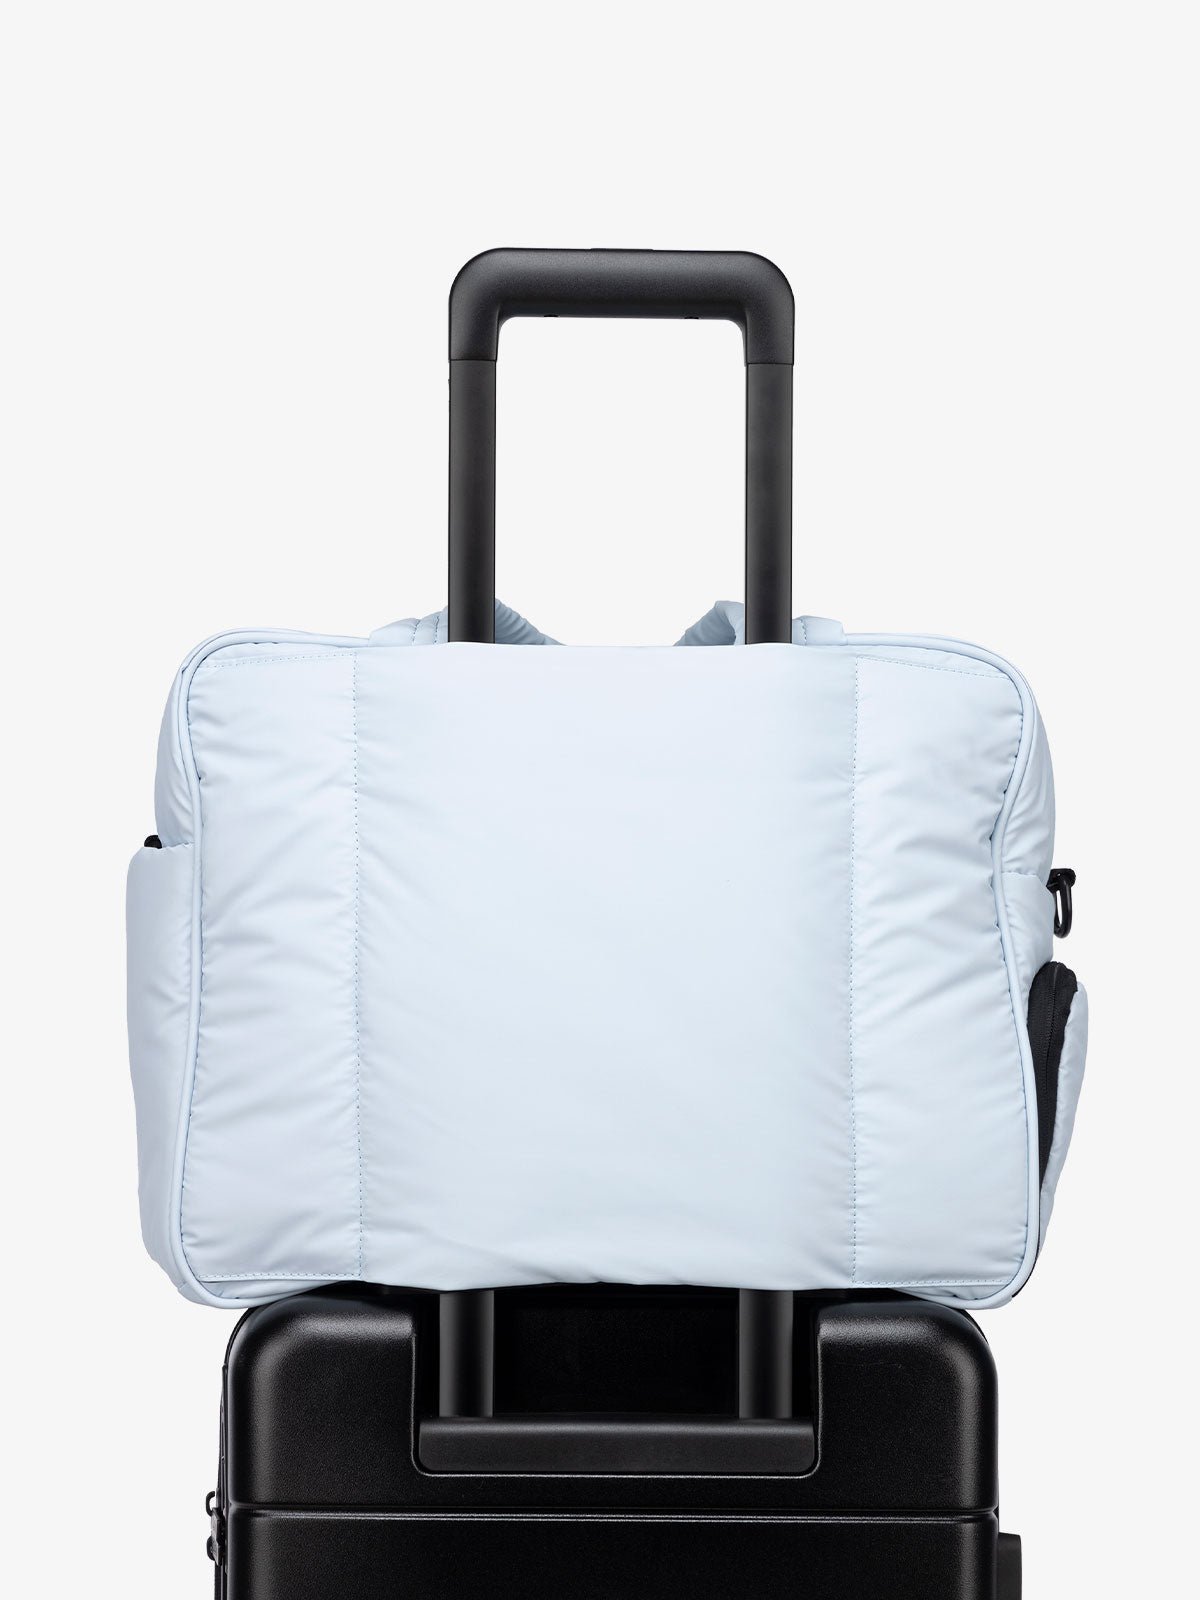 light blue duffle bag for travel with luggage trolley sleeve